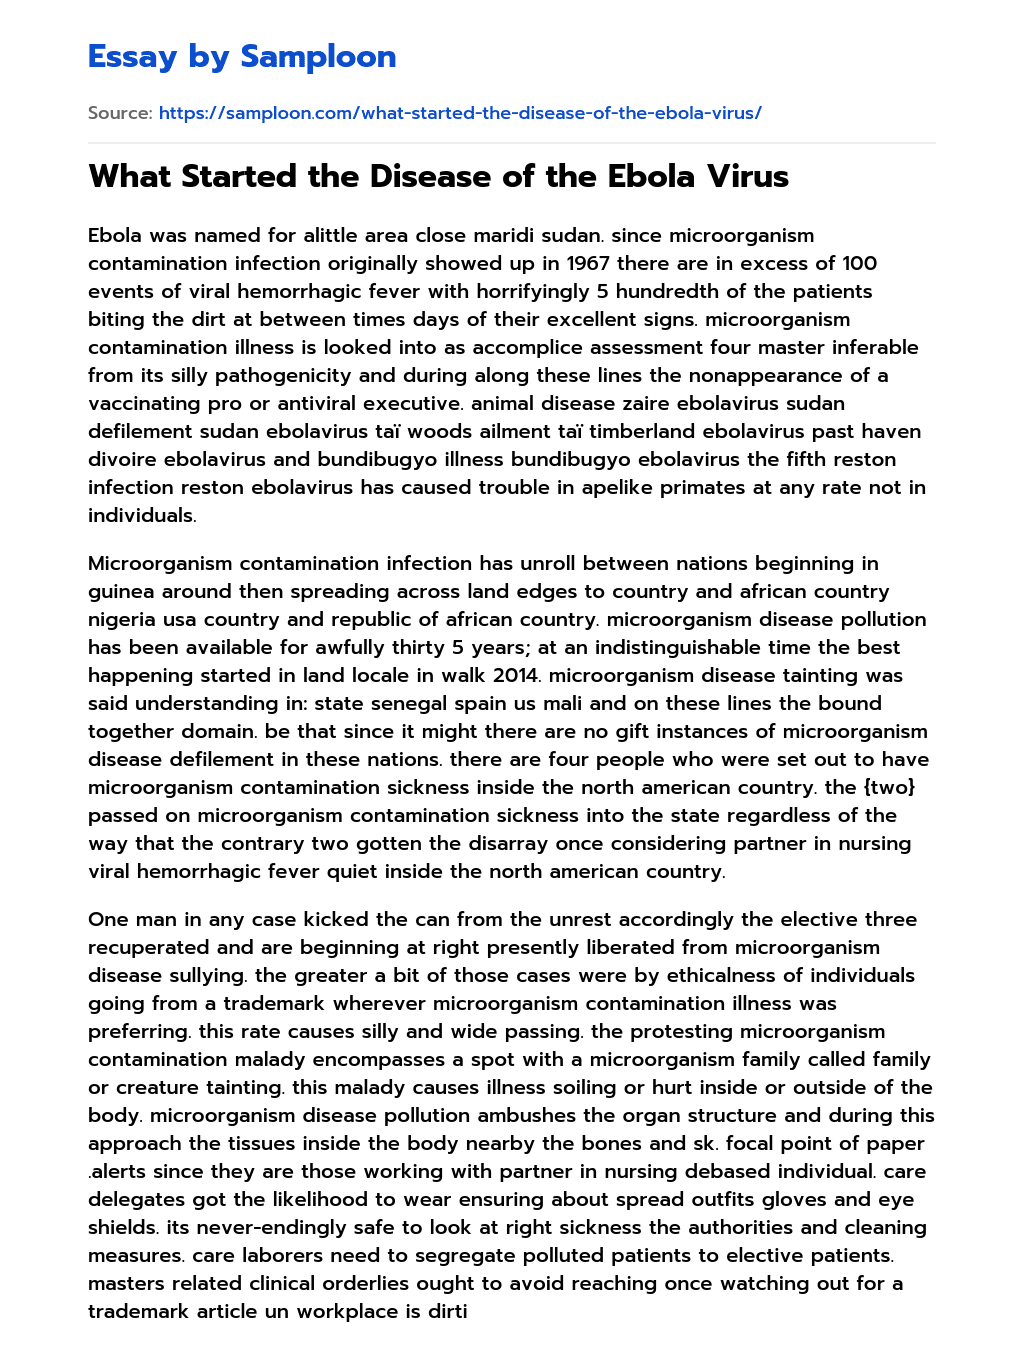 What Started the Disease of the Ebola Virus essay